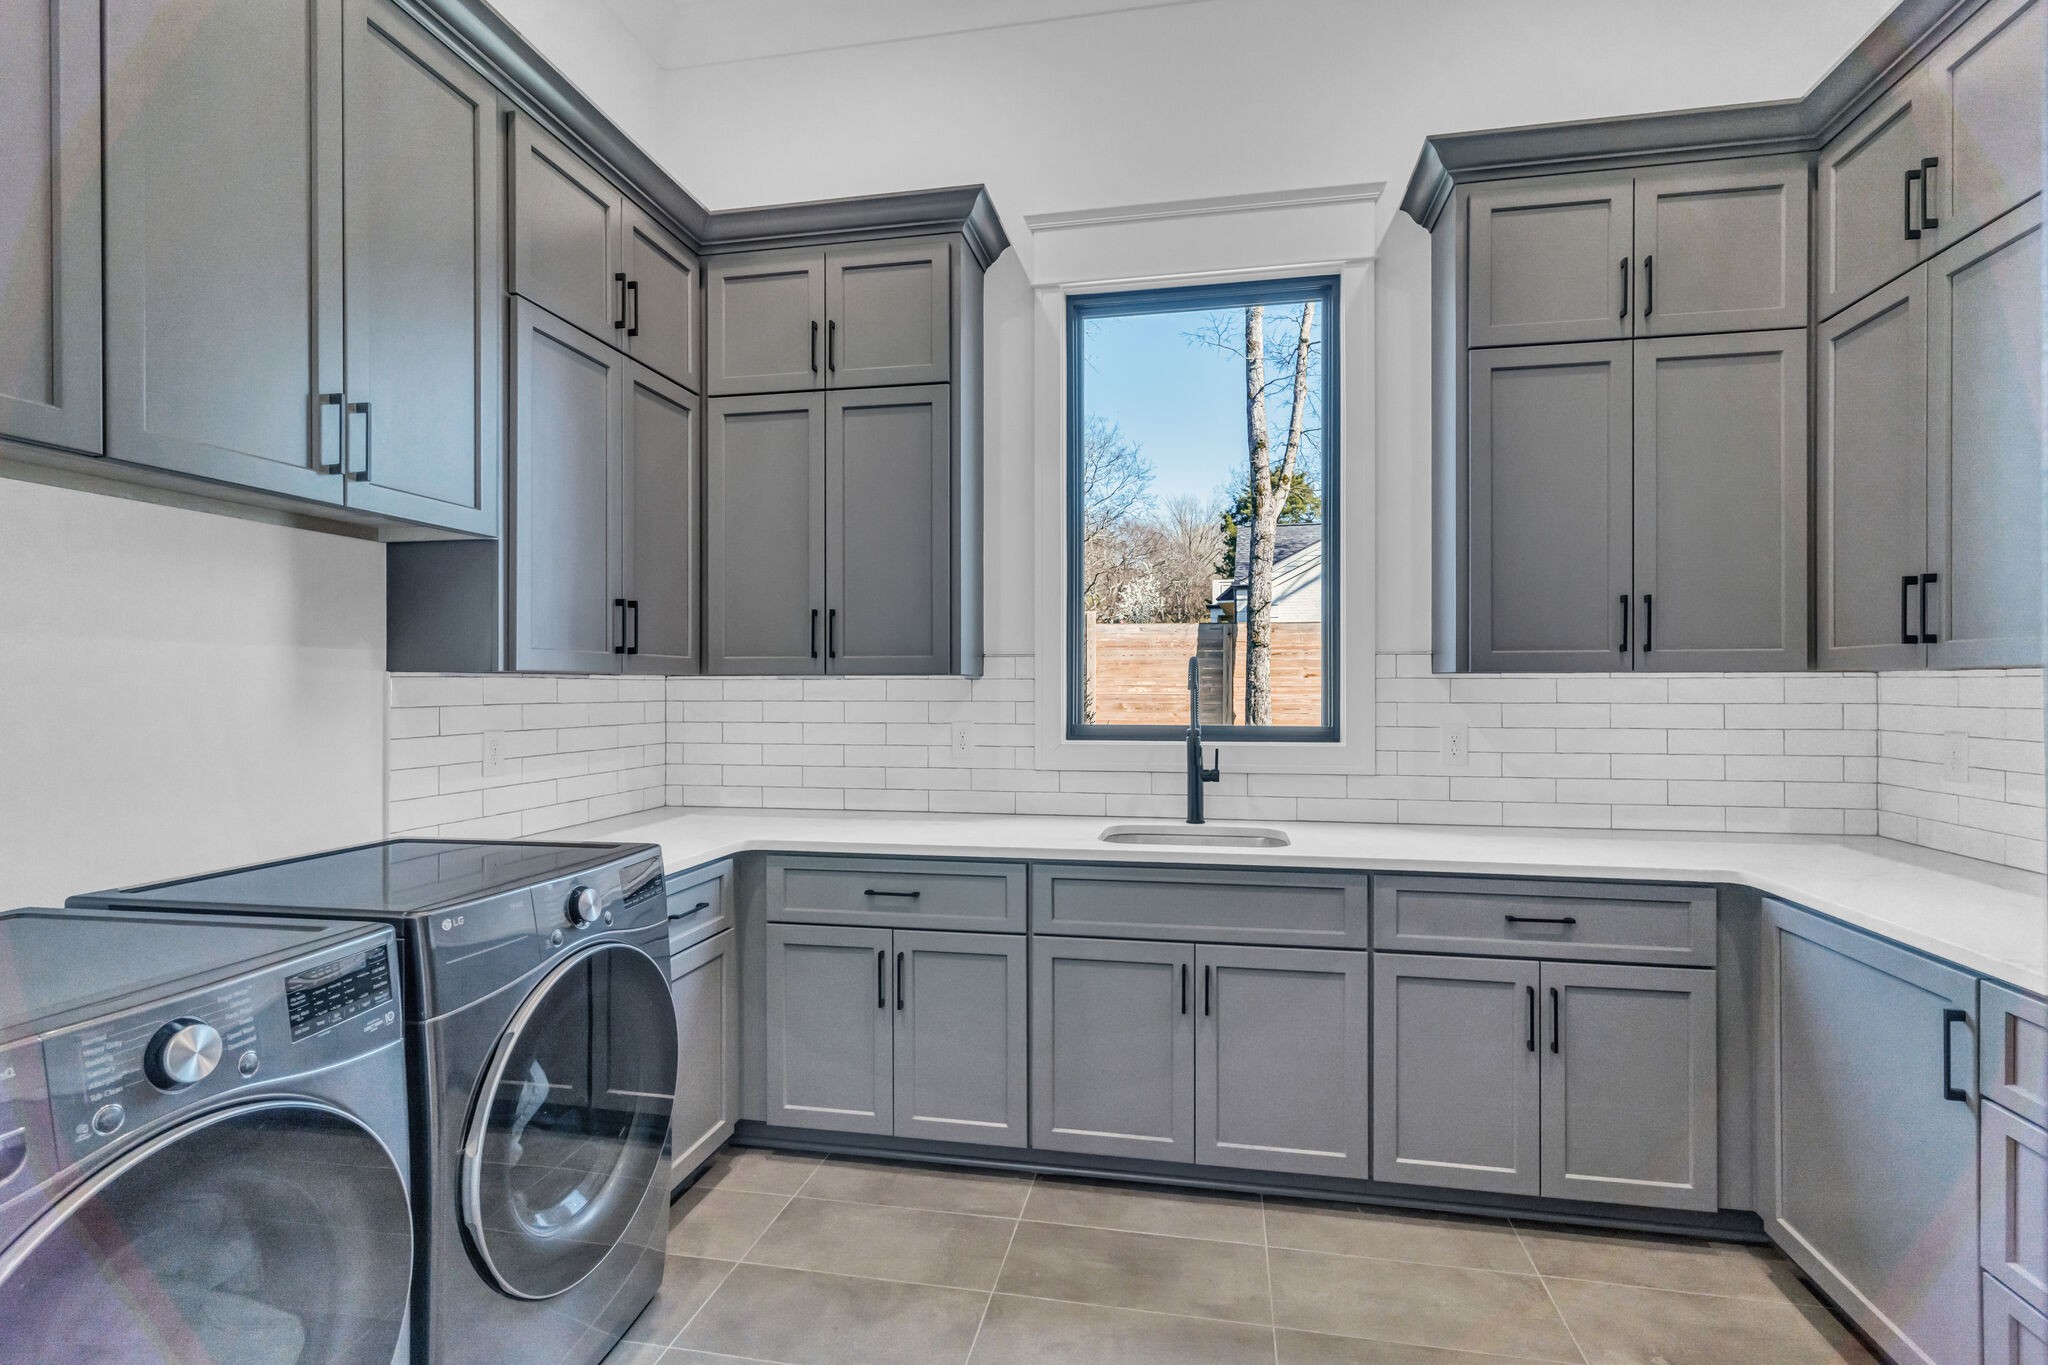 Spacious laundry room featuring gray cabinets with contemporary hardware, subway tile backsplash, and advanced washing appliances, by Destination Cabinets.